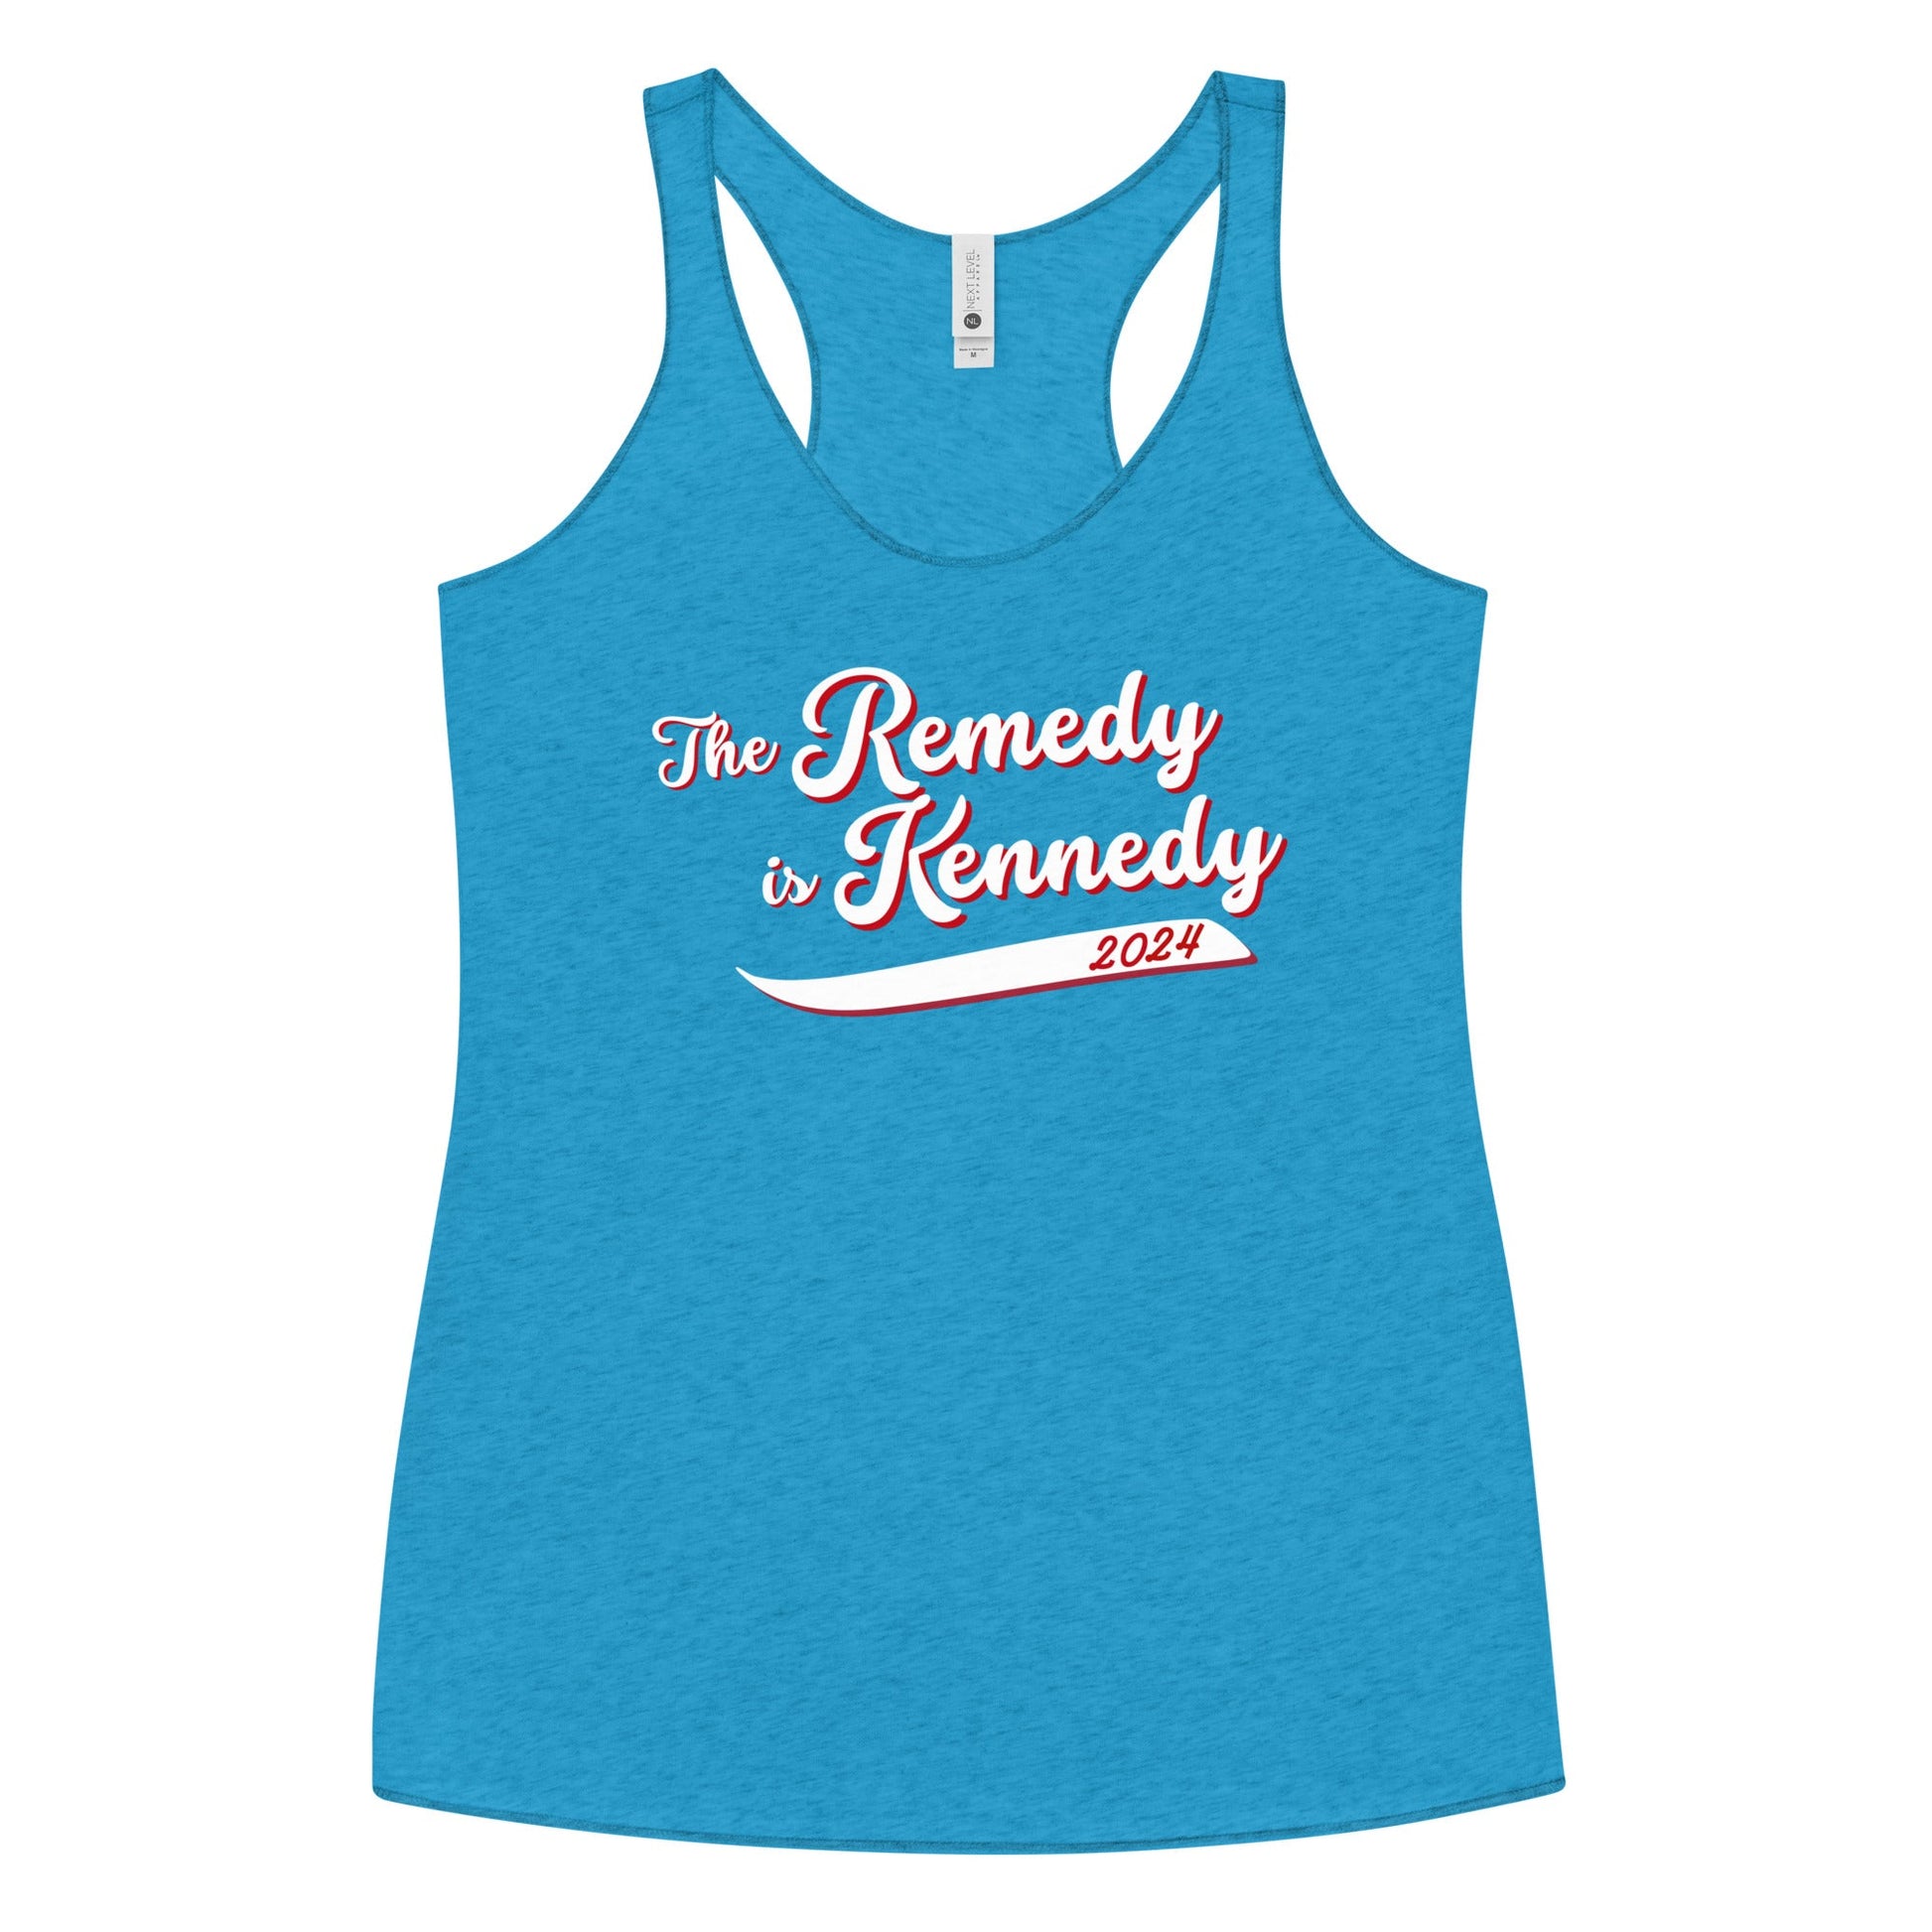 The Remedy is Kennedy Women's Racerback Tank - TEAM KENNEDY. All rights reserved